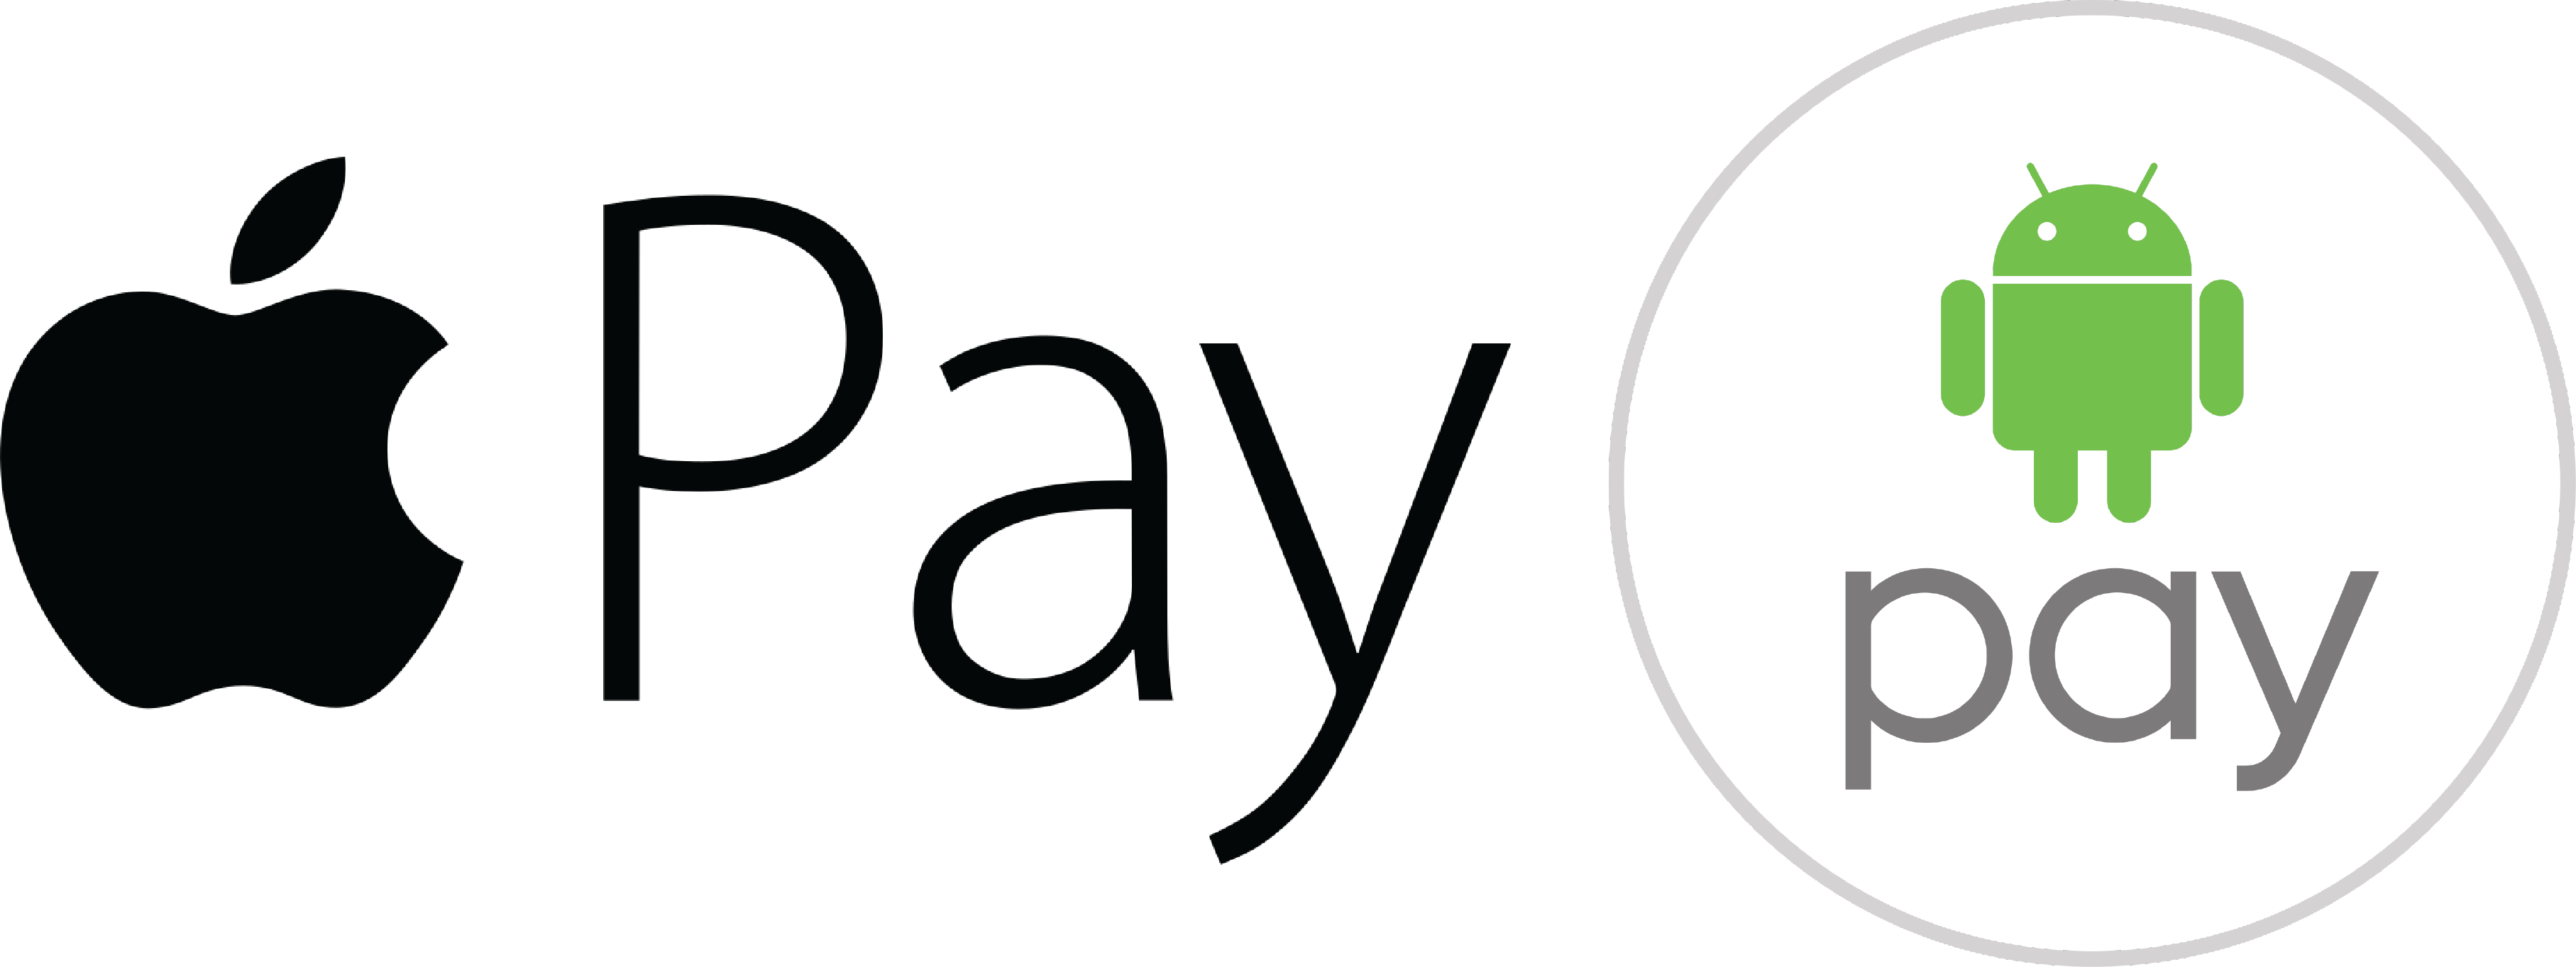 Https pay m. Android pay. Android pay logo. Логотип Пэй. Apple pay логотип.